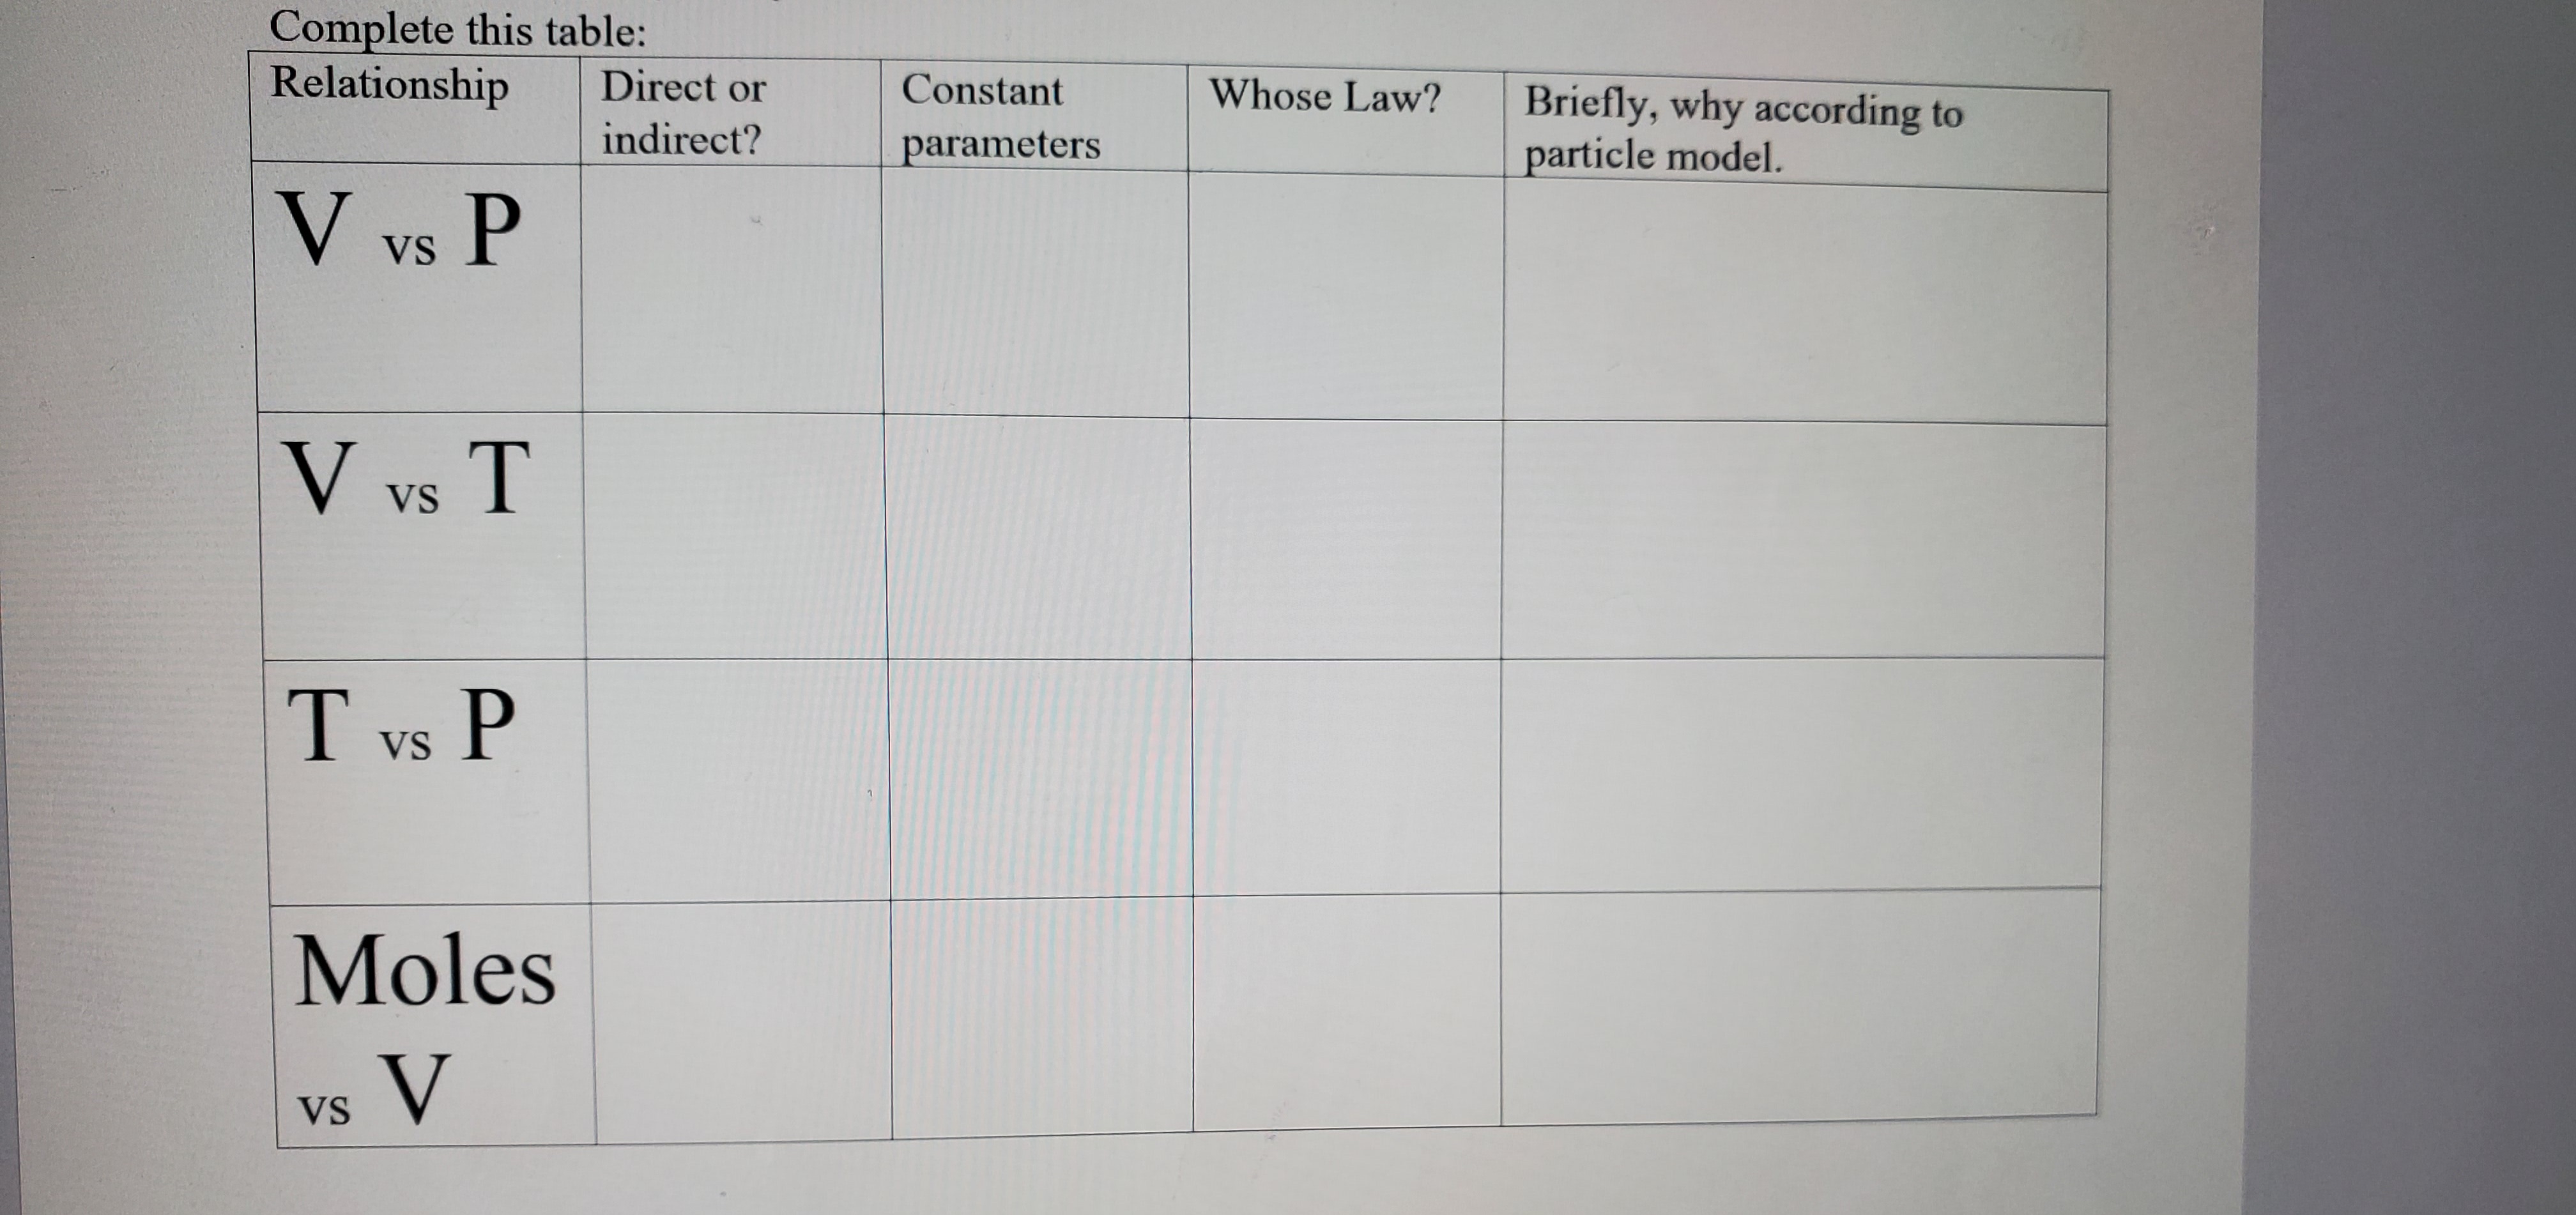 Complete this table:
Relationship
Direct or
Constant
Whose Law?
Briefly, why according to
particle model.
indirect?
parameters
V vs P
V vs T
T vs P
VS
Moles
vs V
